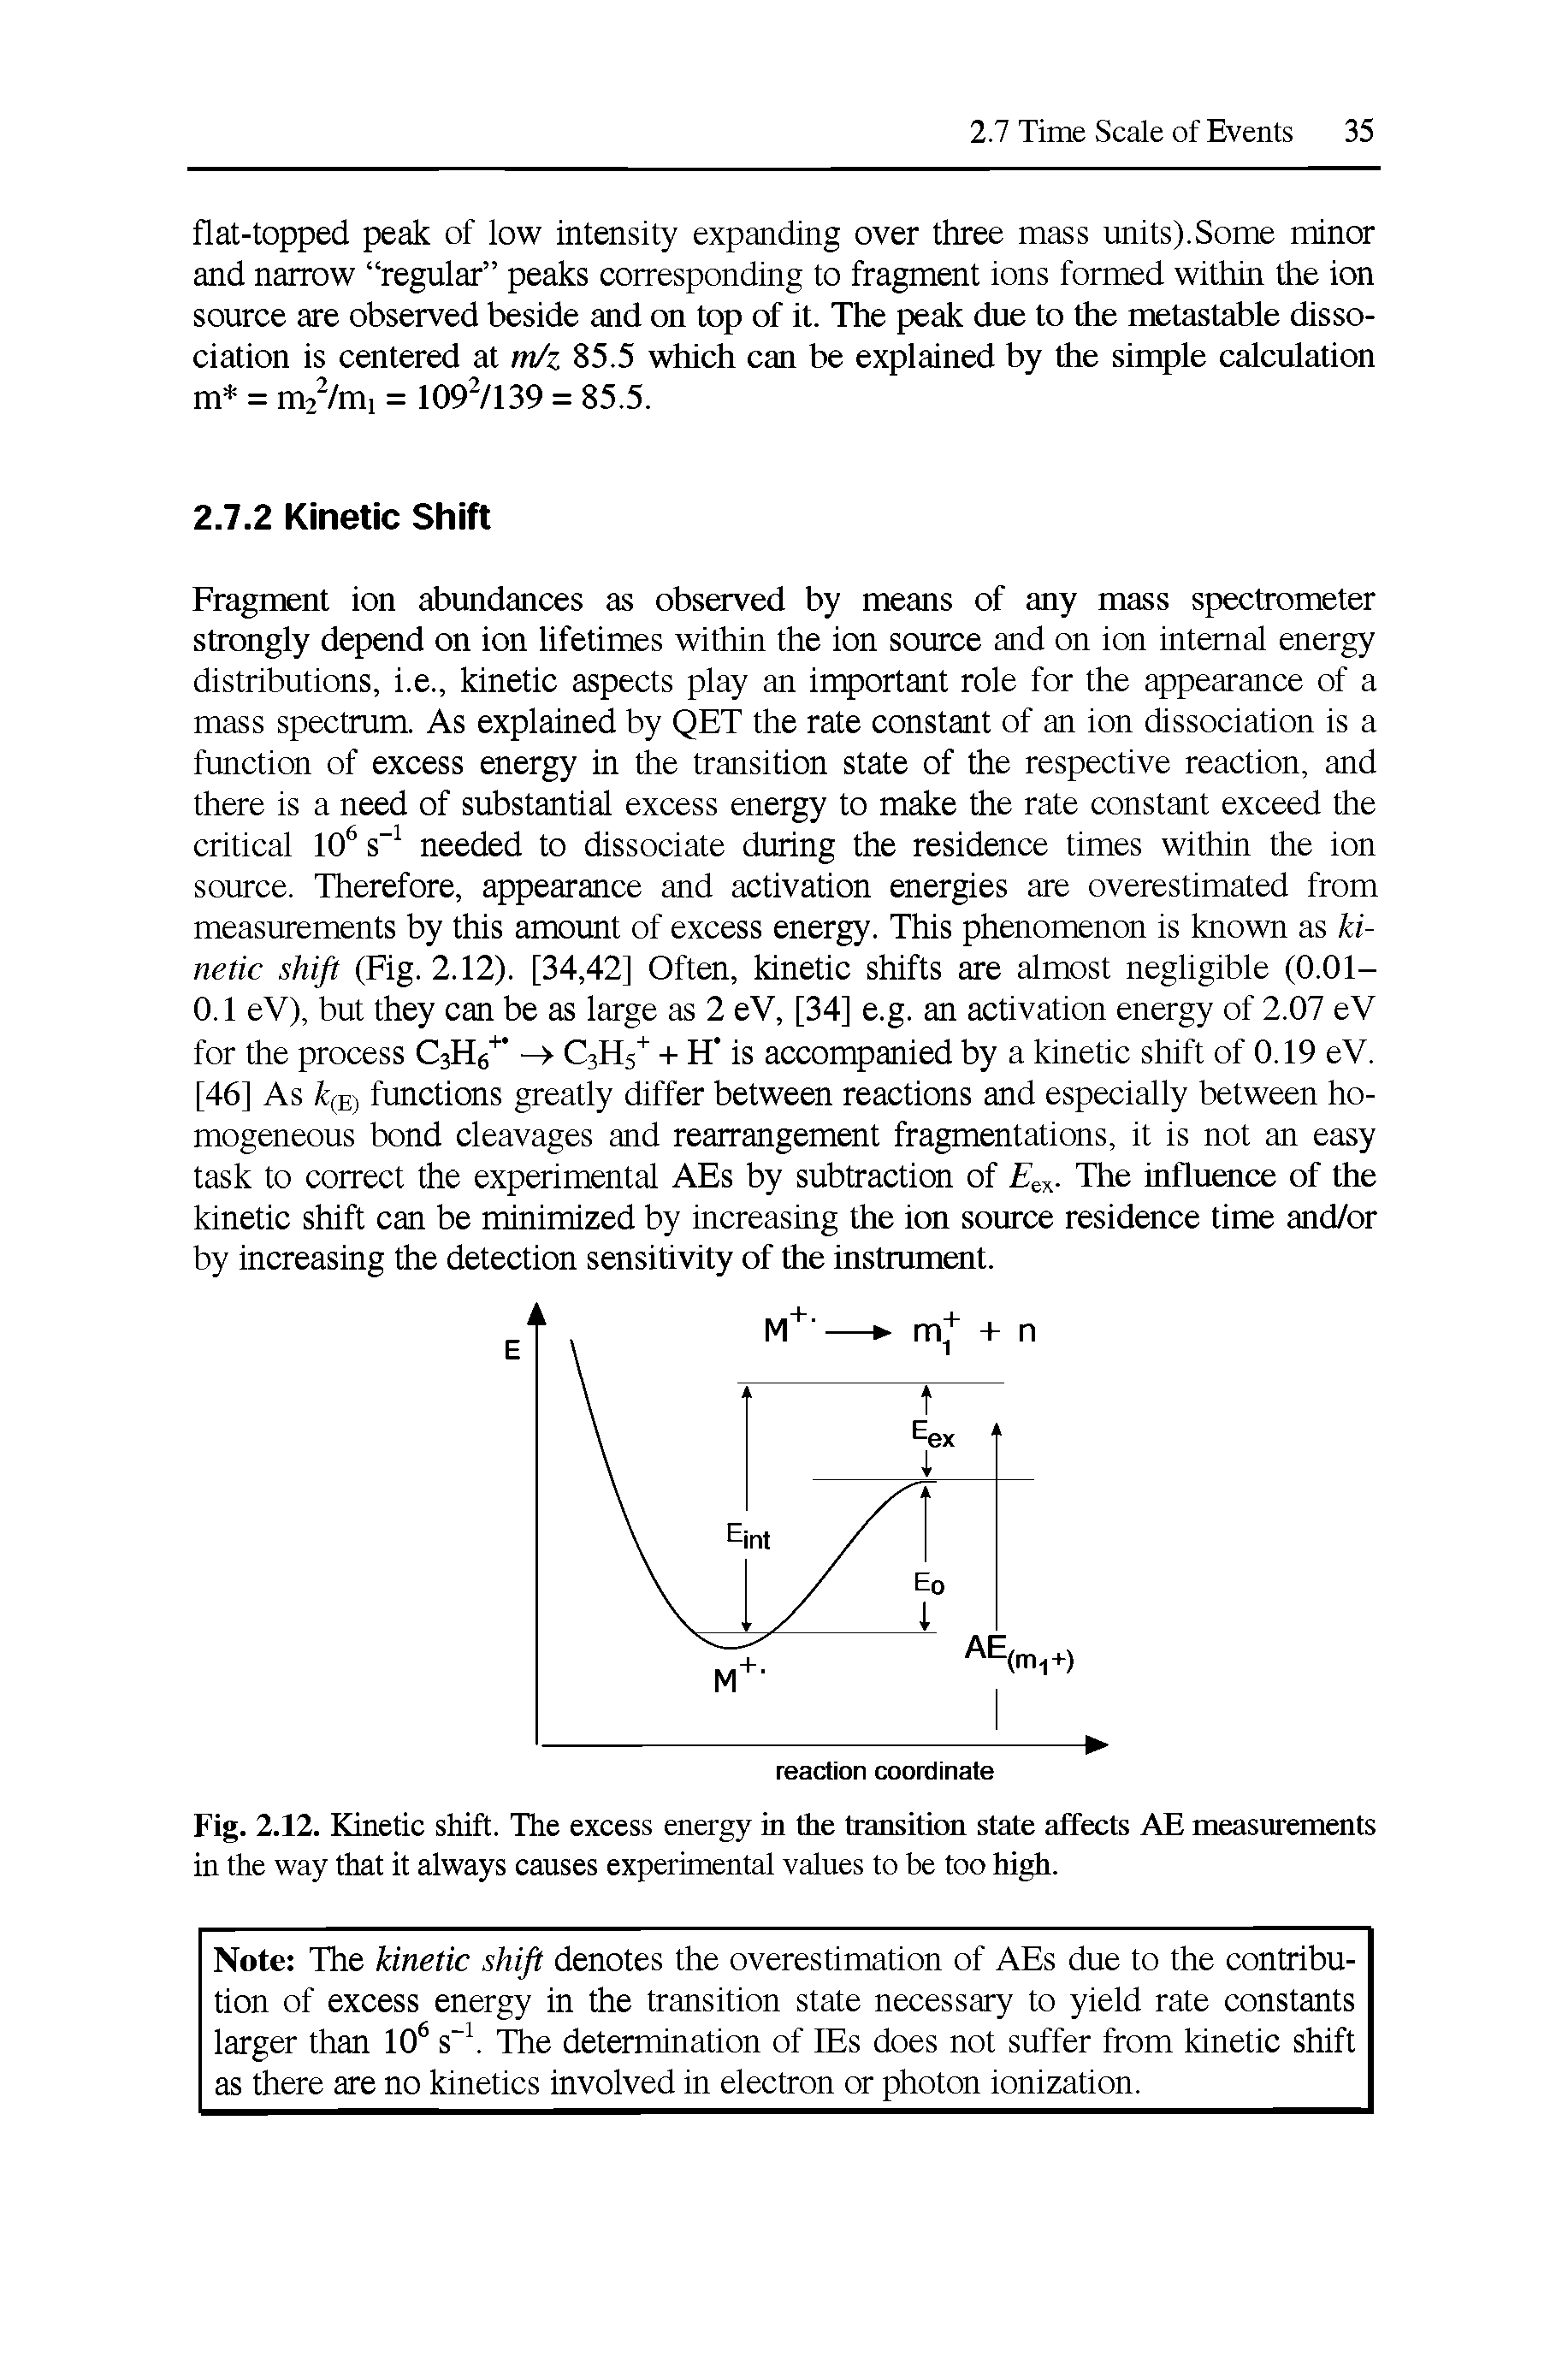 Fig. 2.12. Kinetic shift. The excess energy in the transition state affects AE measurements in the way that it always causes experimental values to be too high.